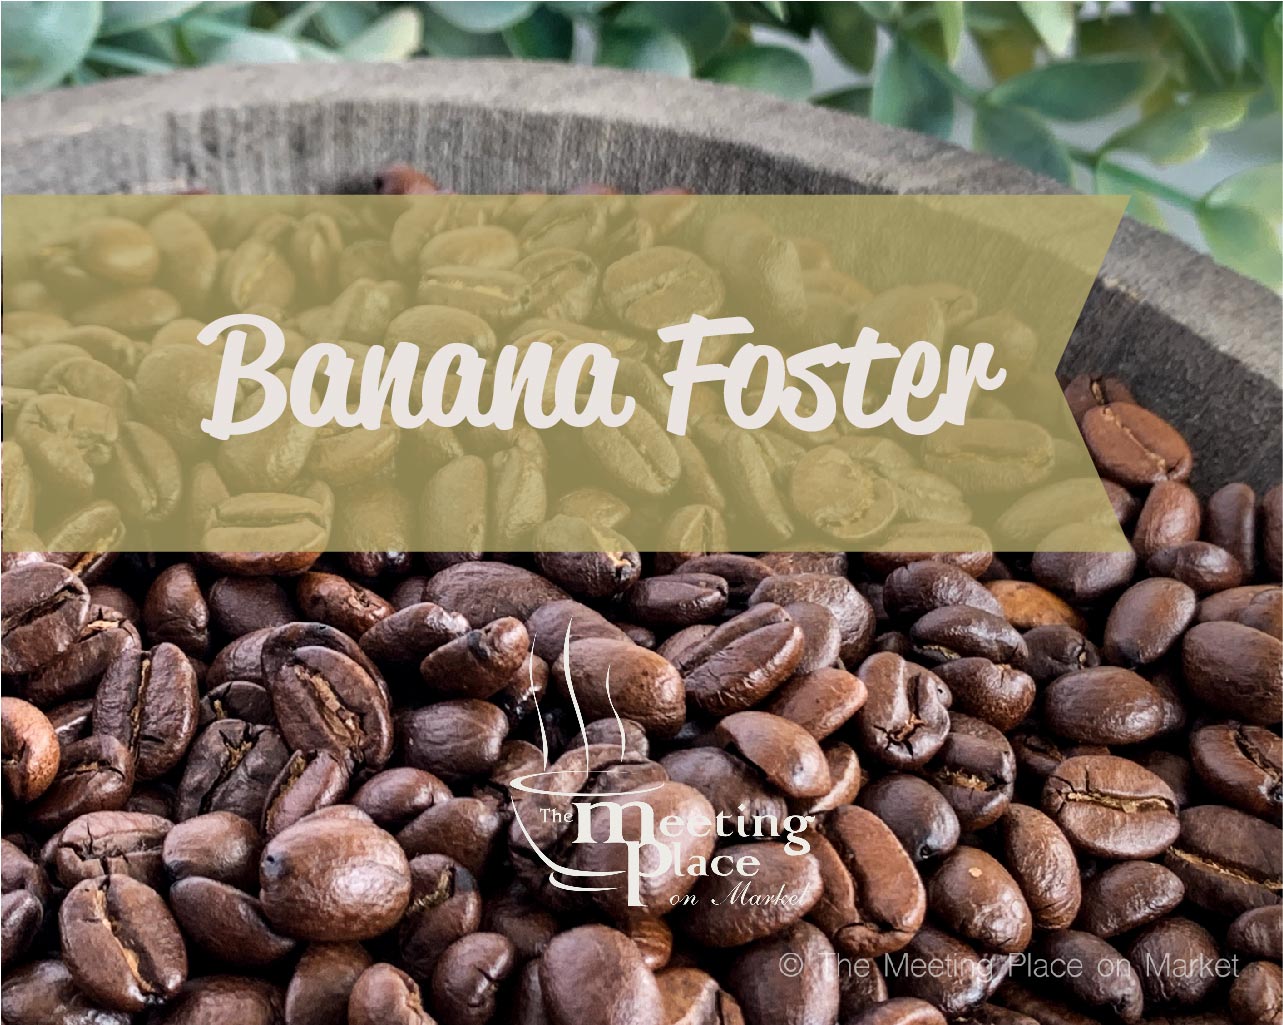 Banana Foster Flavored Coffee Beans / Ground Coffee Gourmet Coffee - The Meeting Place on Market